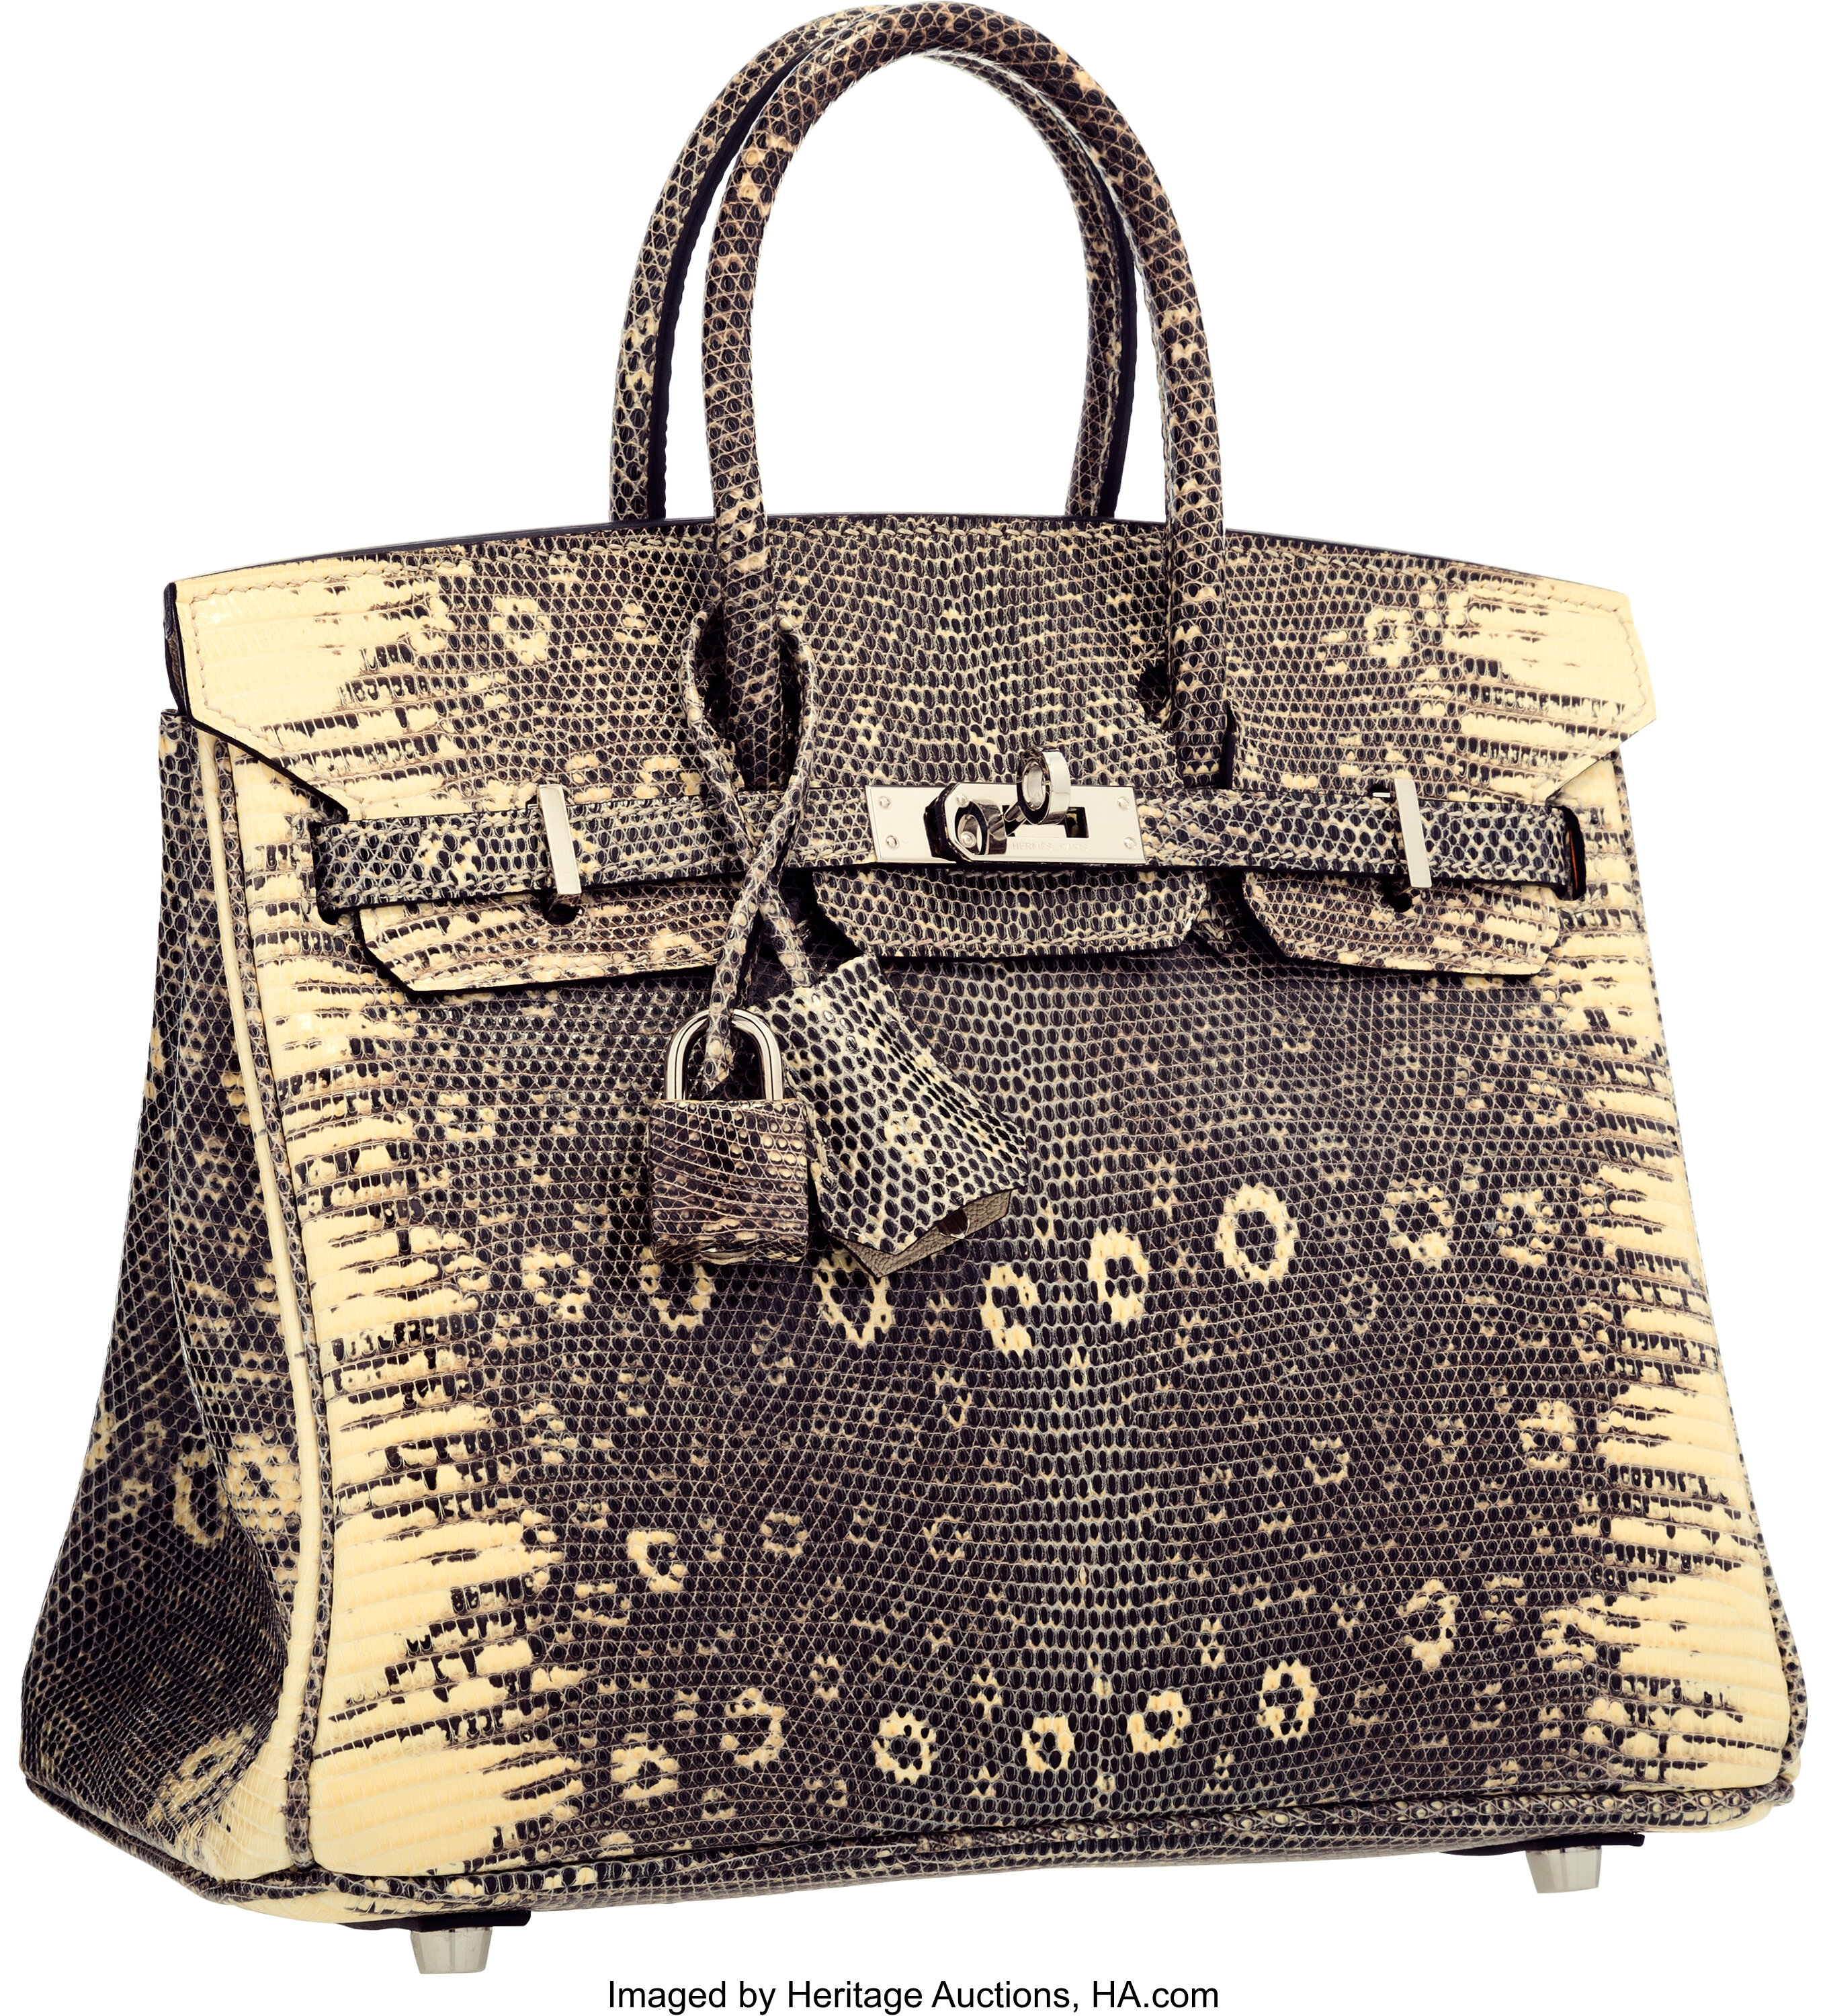 Sold at Auction: HERMES BIRKIN 25 IN OMBRE LIZARD WITH PALLADIUM